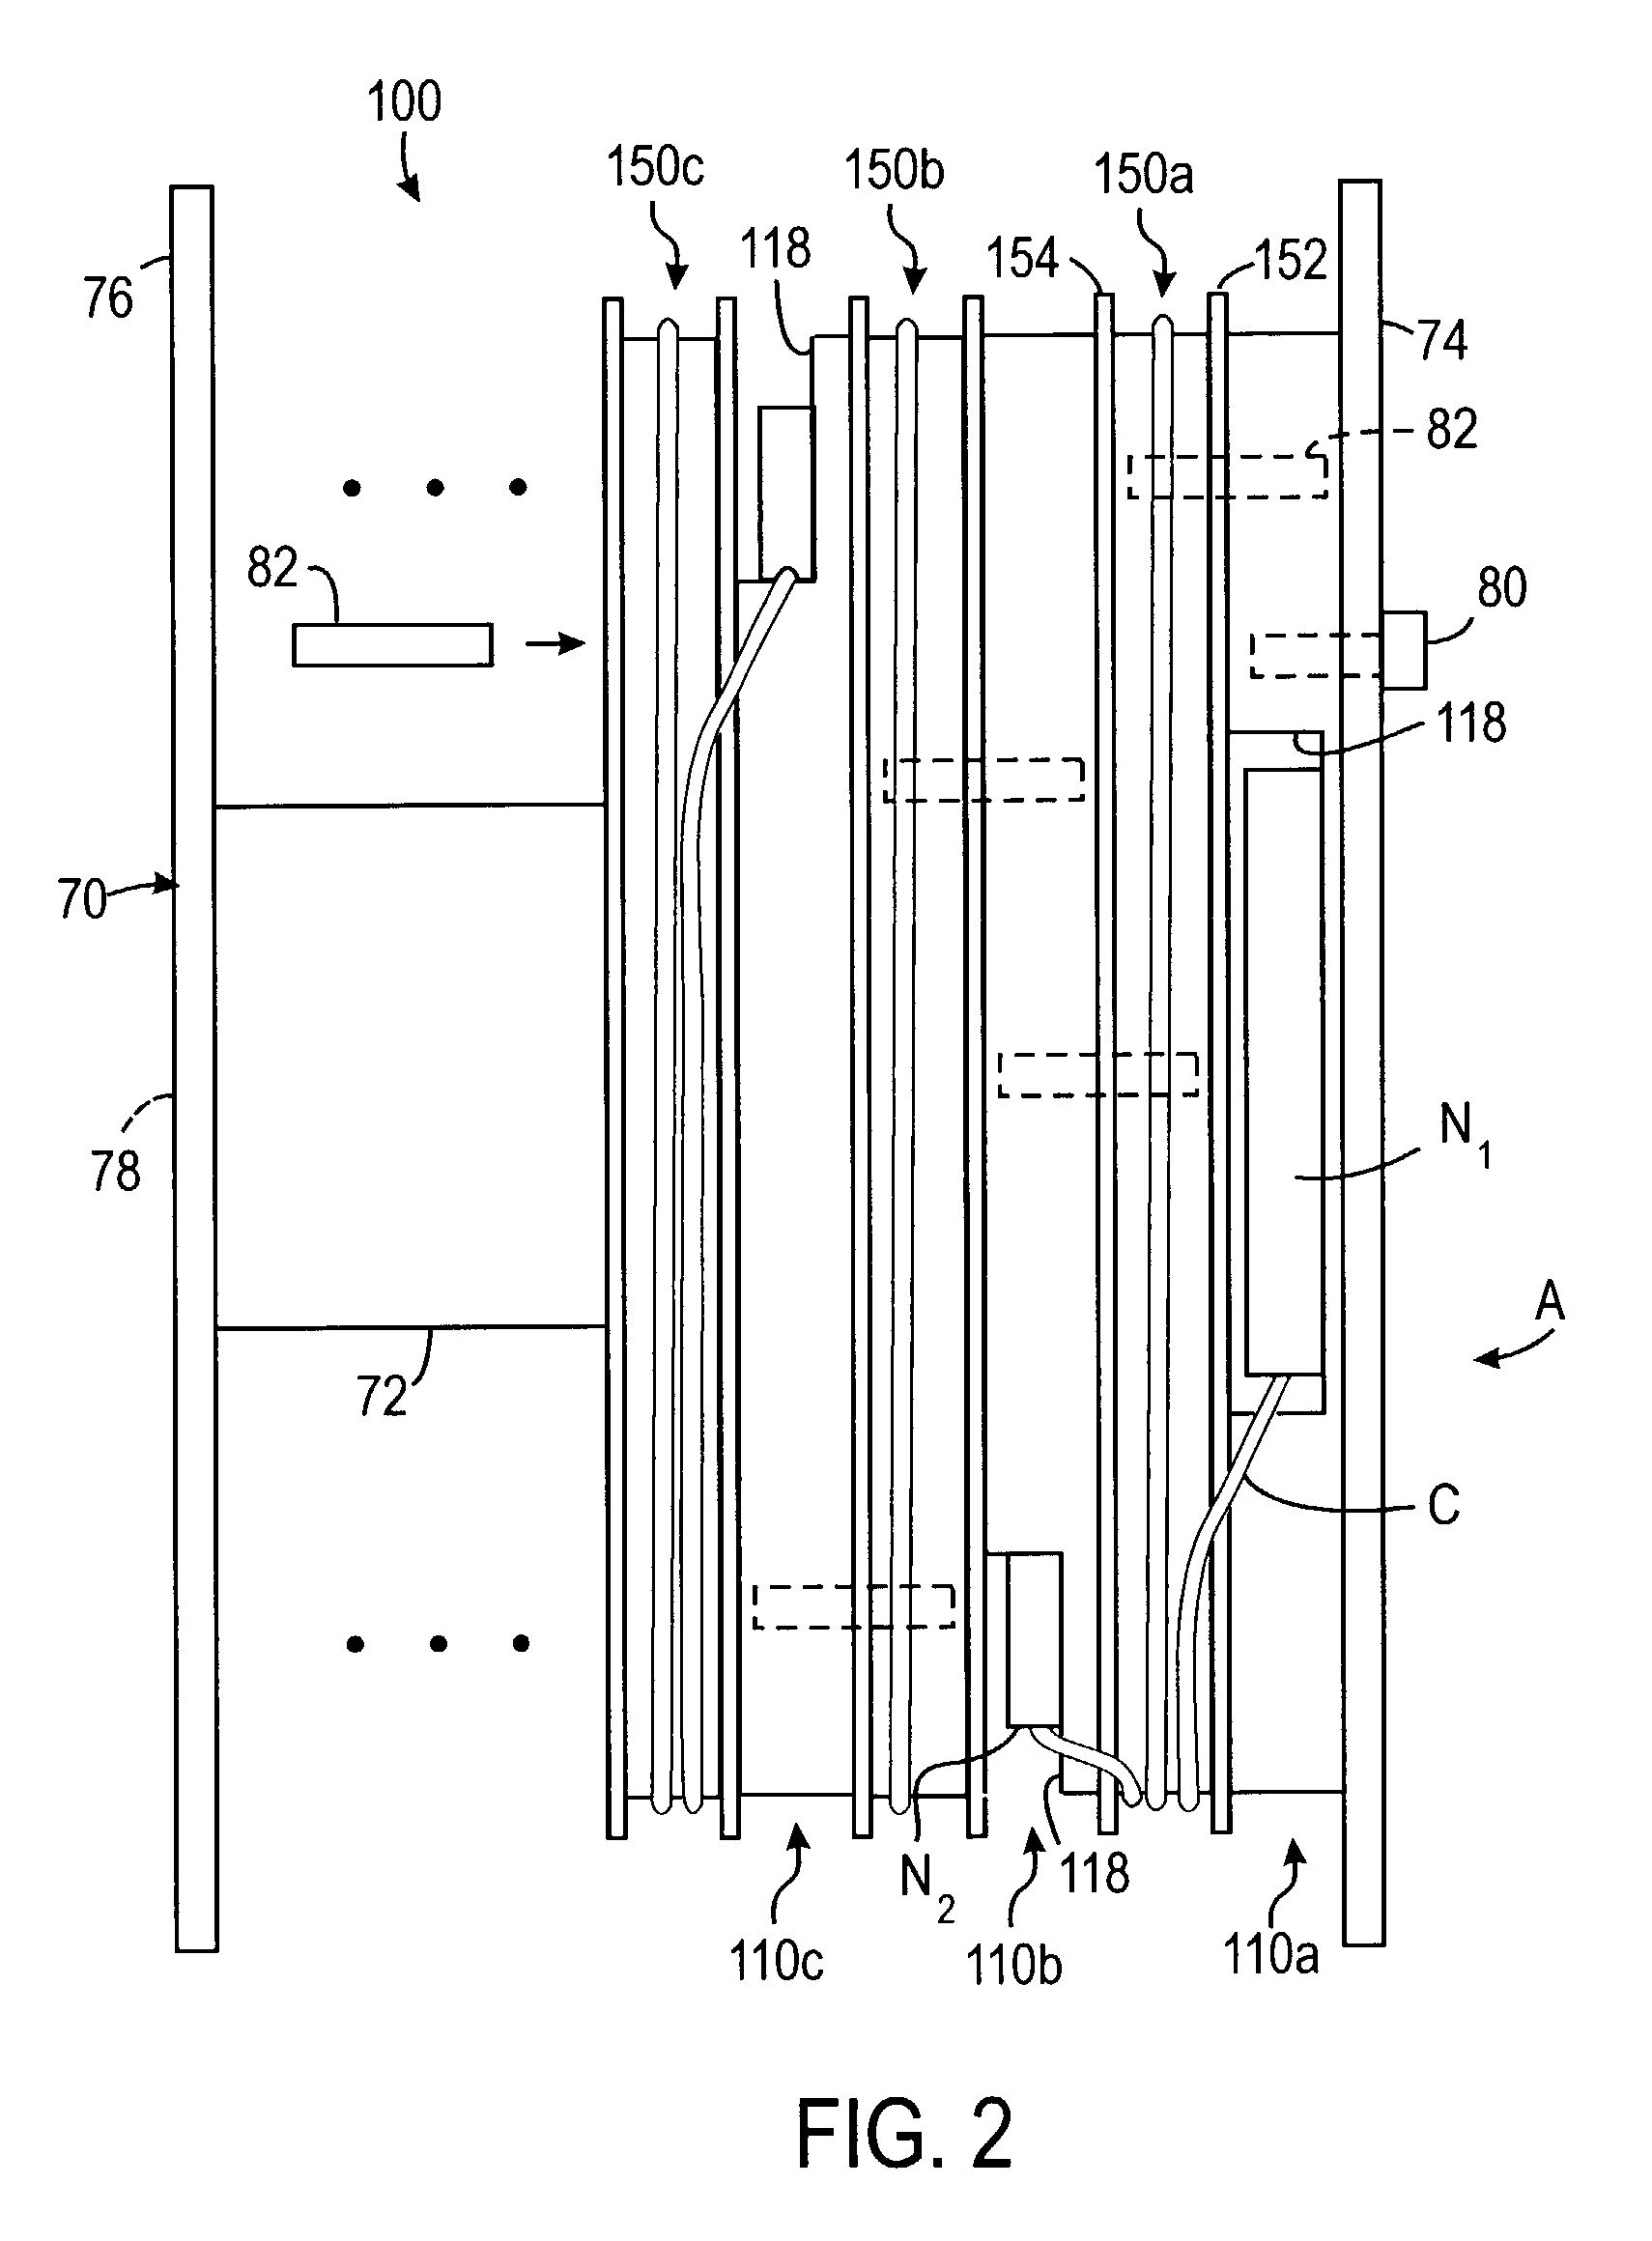 Apparatus and method for transporting, deploying, and retrieving arrays having nodes interconnected by sections of cable